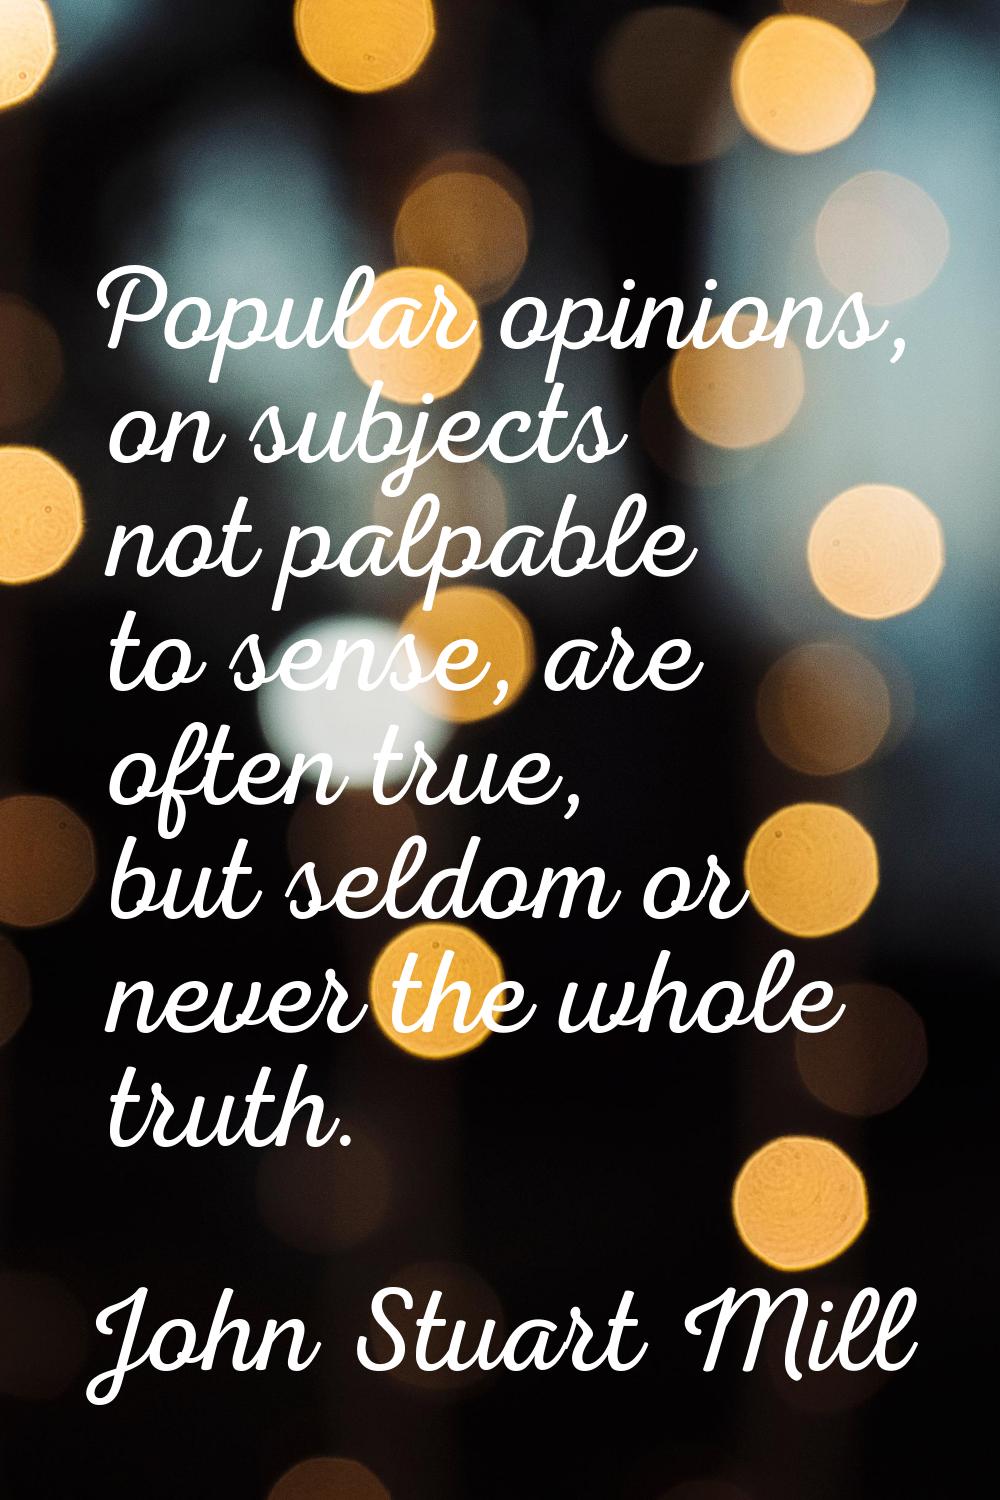 Popular opinions, on subjects not palpable to sense, are often true, but seldom or never the whole 